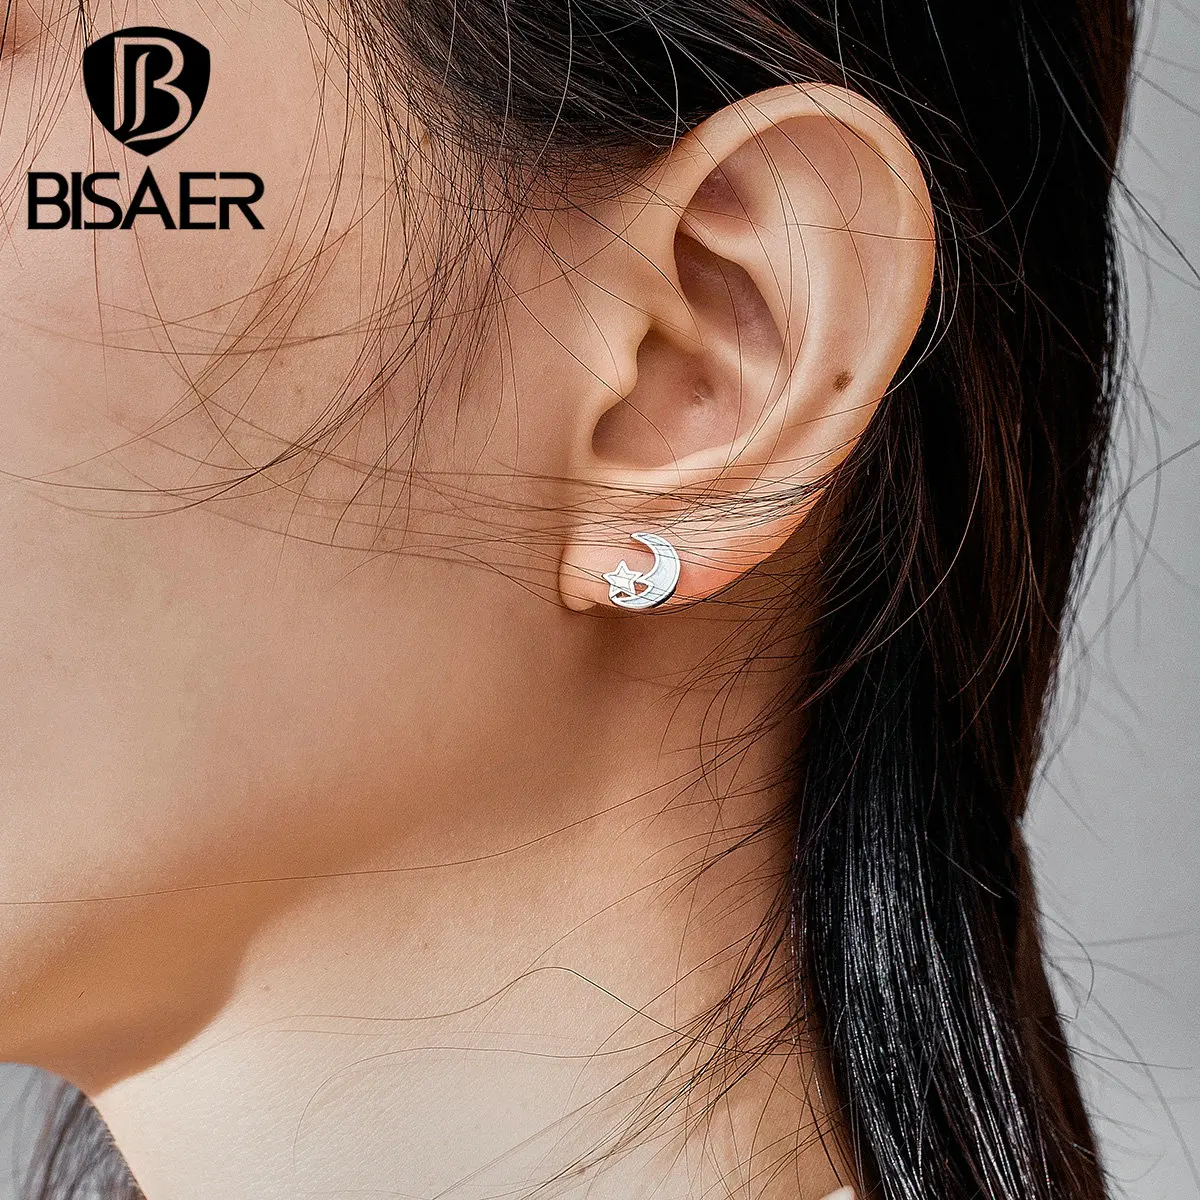 Moon Shape BISAER Authentic 925 Sterling Silver Moon& Star Small Stud Earrings for Women Silver Jewelry ECE792